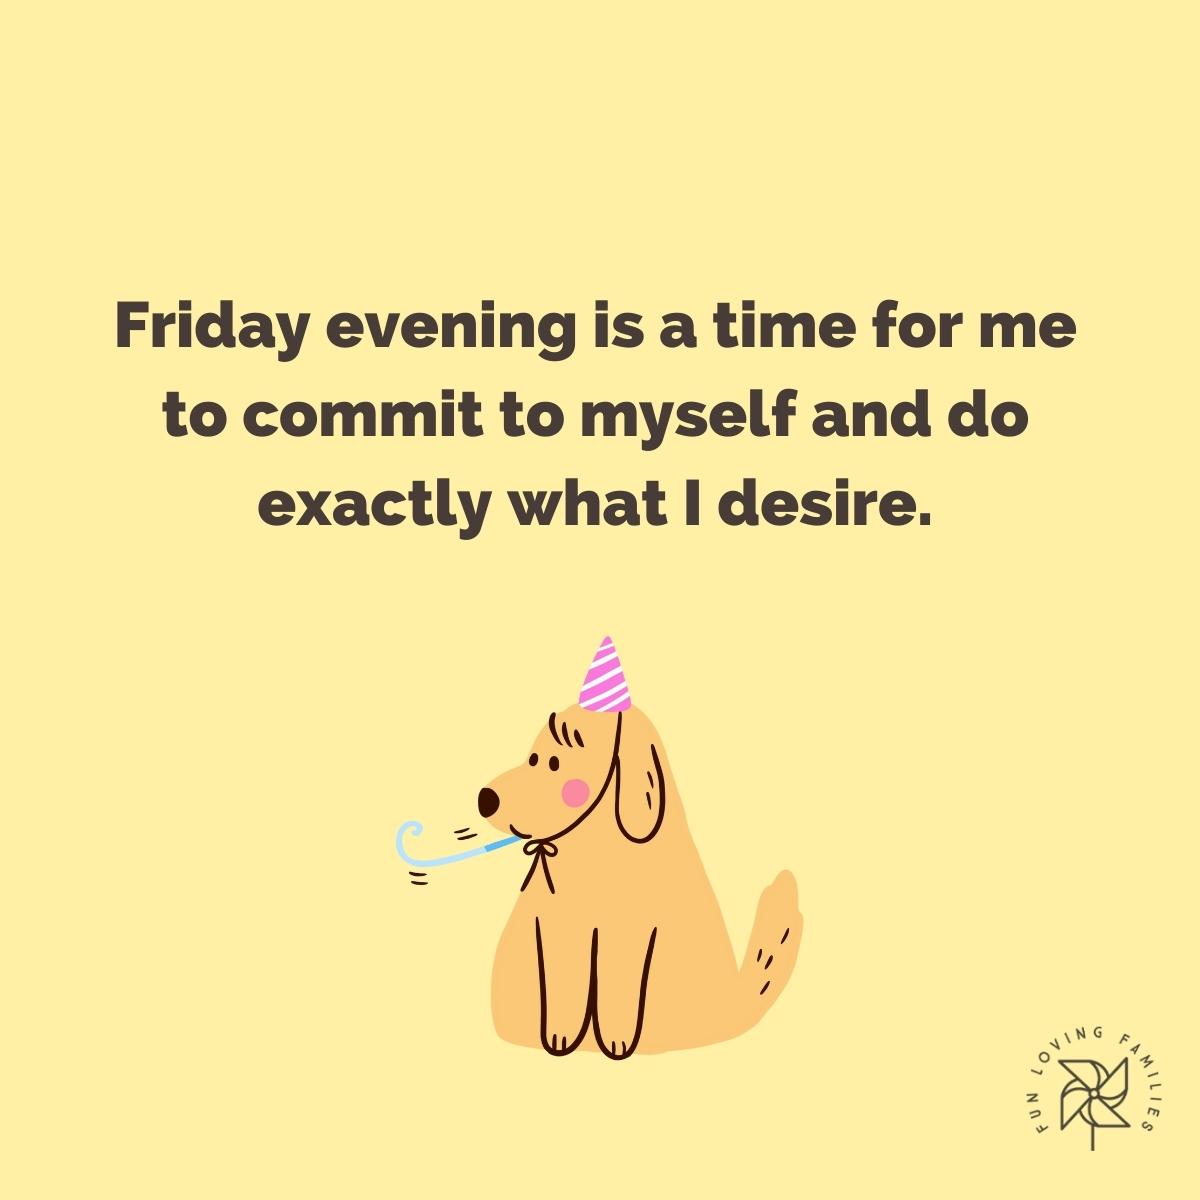 Friday evening is a time for me to commit to myself affirmation